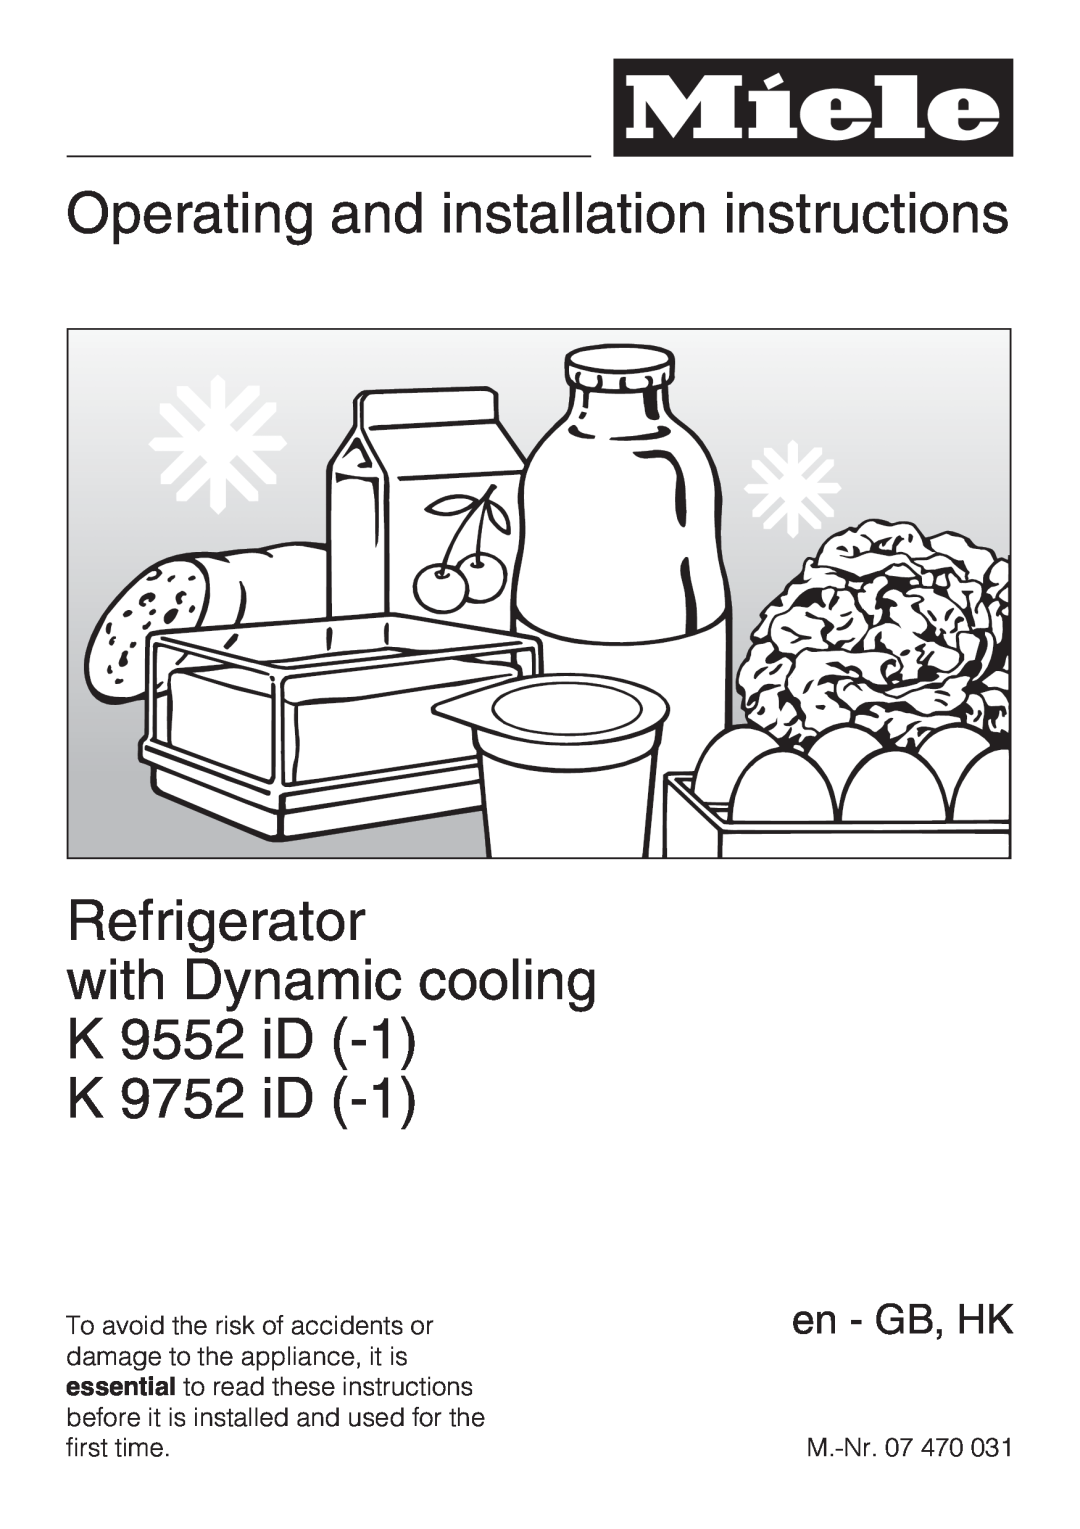 Miele K9552 installation instructions Operating and installation instructions, Refrigerator with Dynamic cooling K 9552 iD 